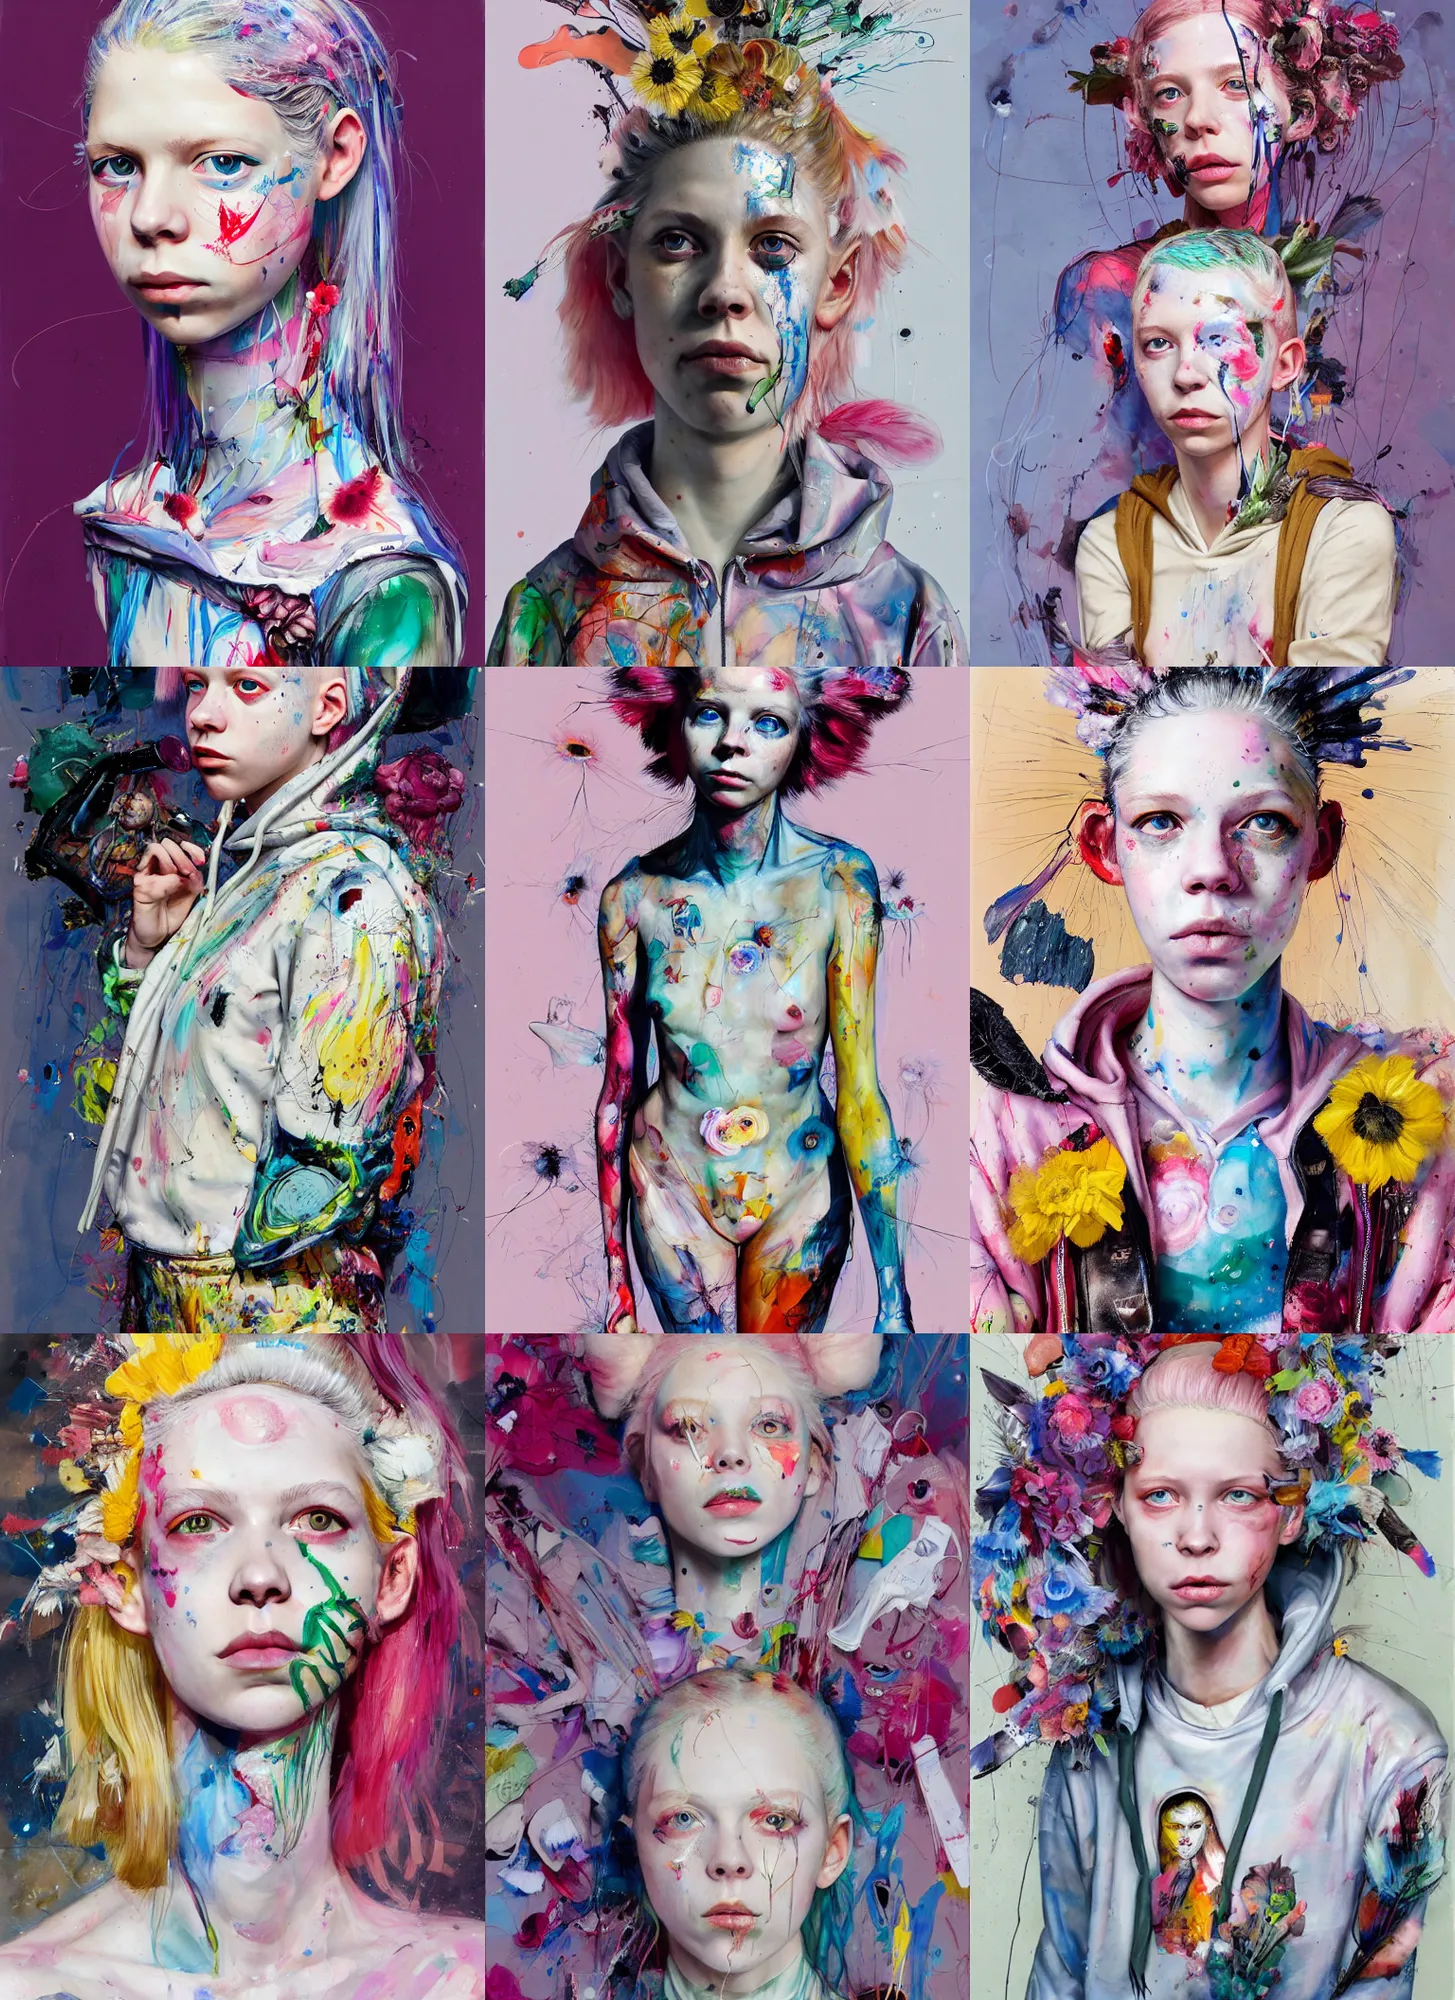 Prompt: hunter schafer in the style of martine johanna and! jenny saville!, wearing a hoodie, standing in a township street, street fashion outfit, haute couture fashion shoot, mascara, full figure painting by john berkey, david choe, ismail inceoglu, decorative flowers, 2 4 mm, die antwoord ( yolandi visser )